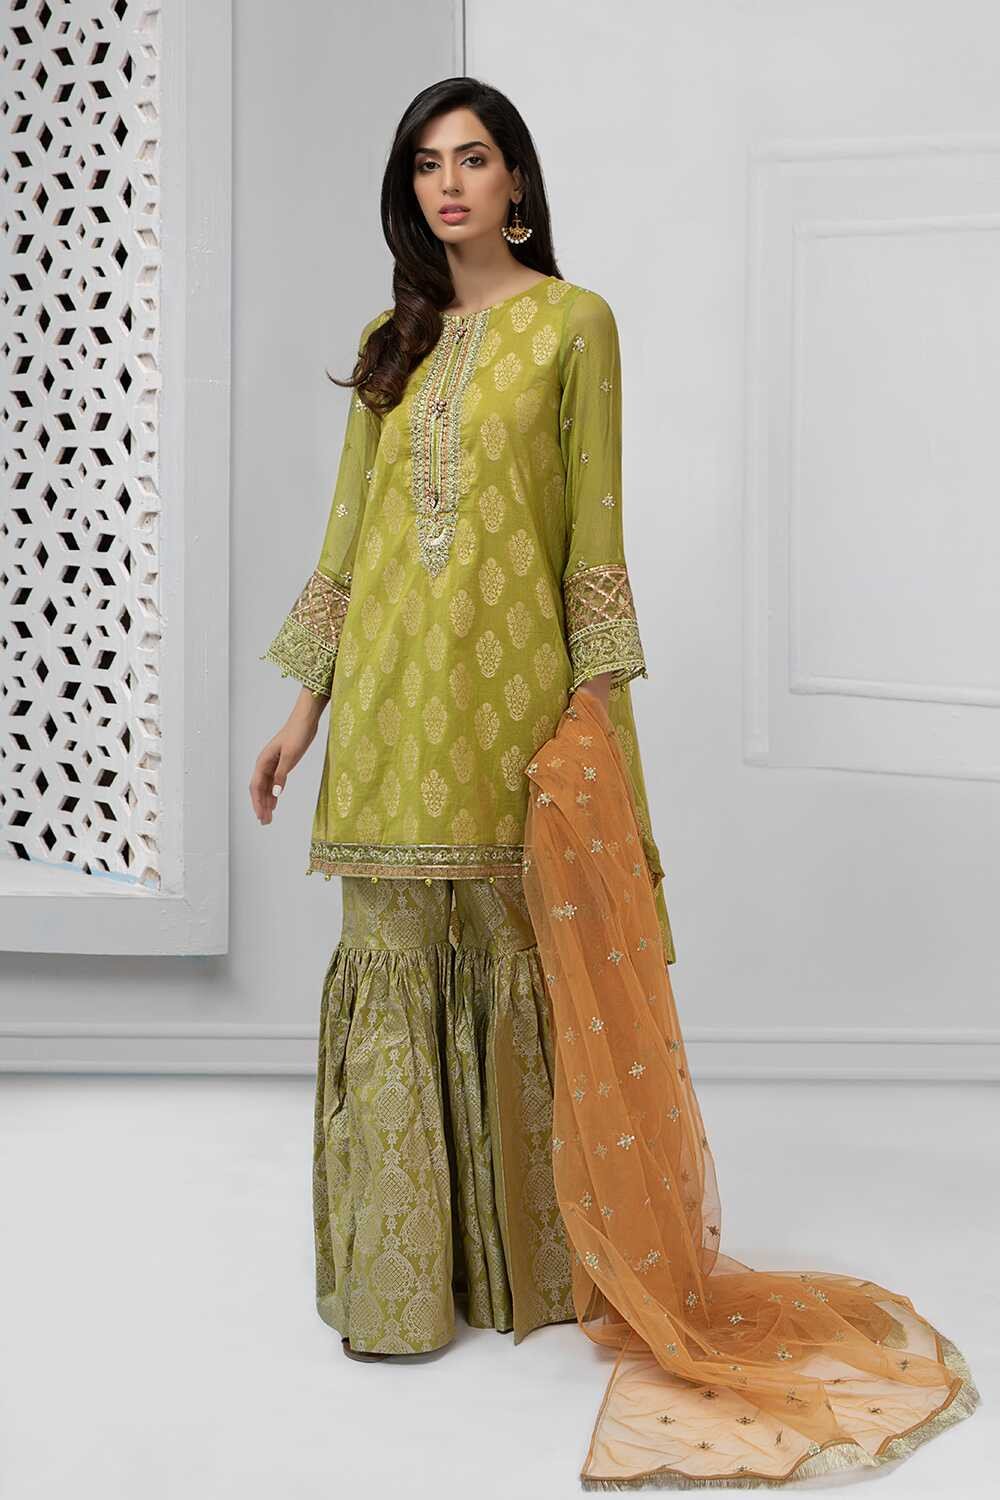 /2019/07/mariab-eid-collection-suit-olive-green-dw-2232-image1.jpeg